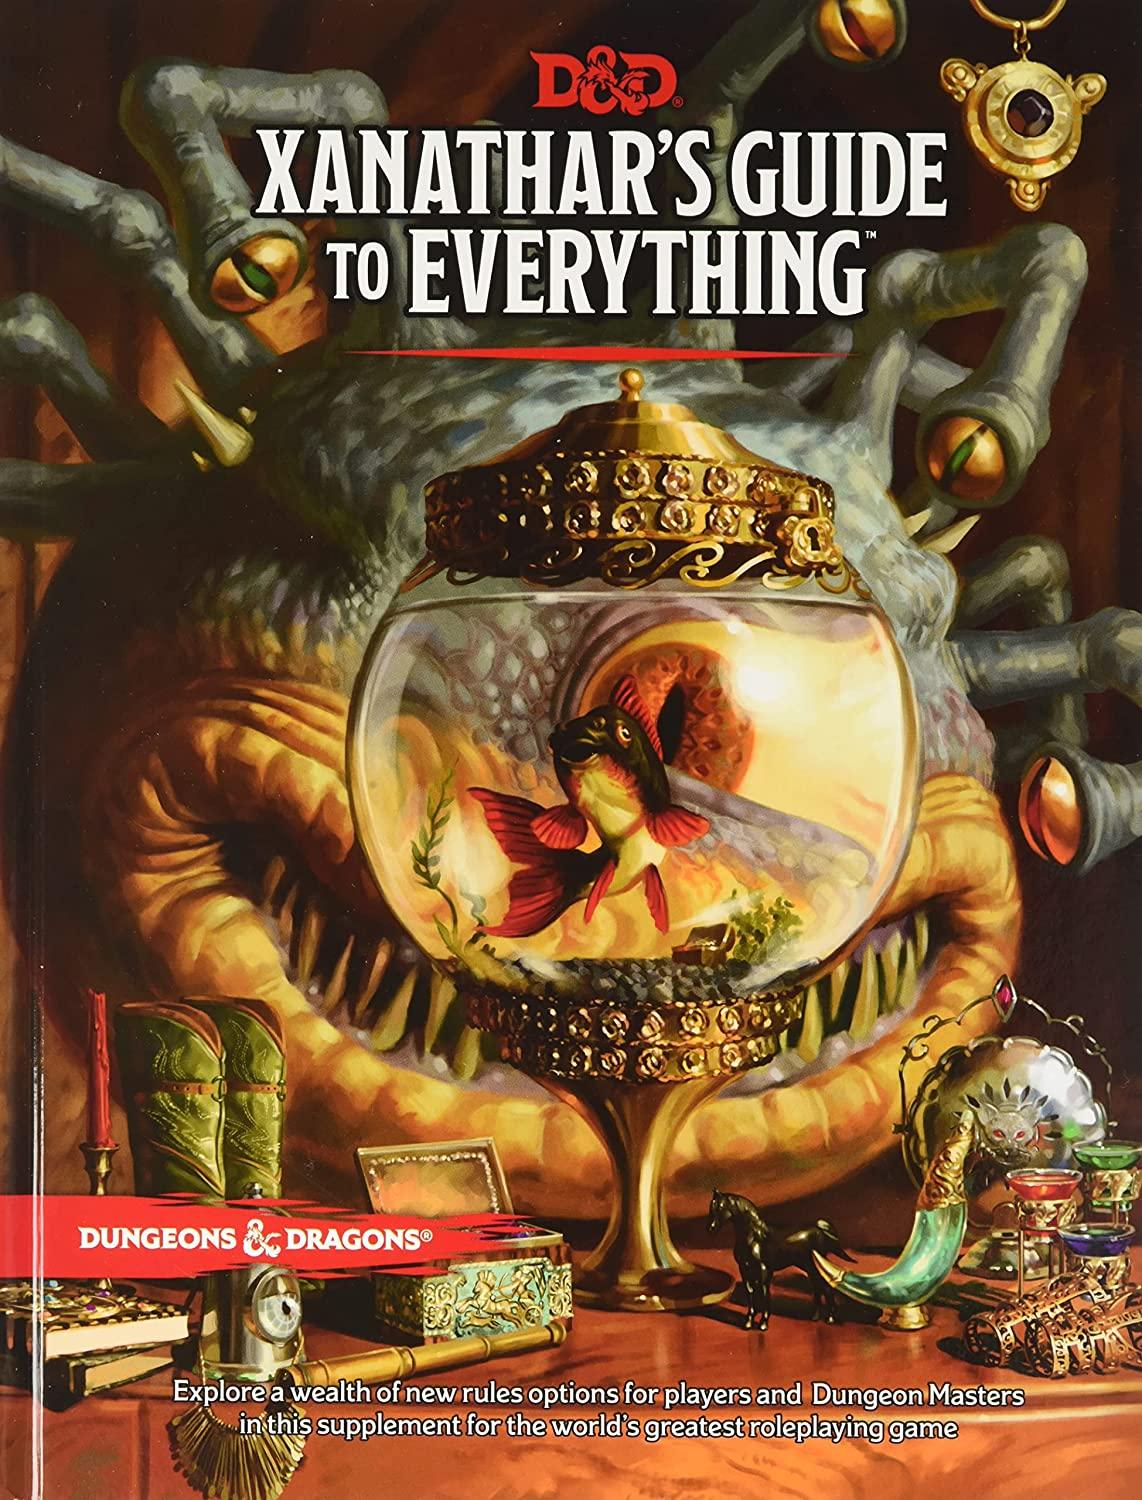 Xanathars Guide to Everything - Mini Megastore